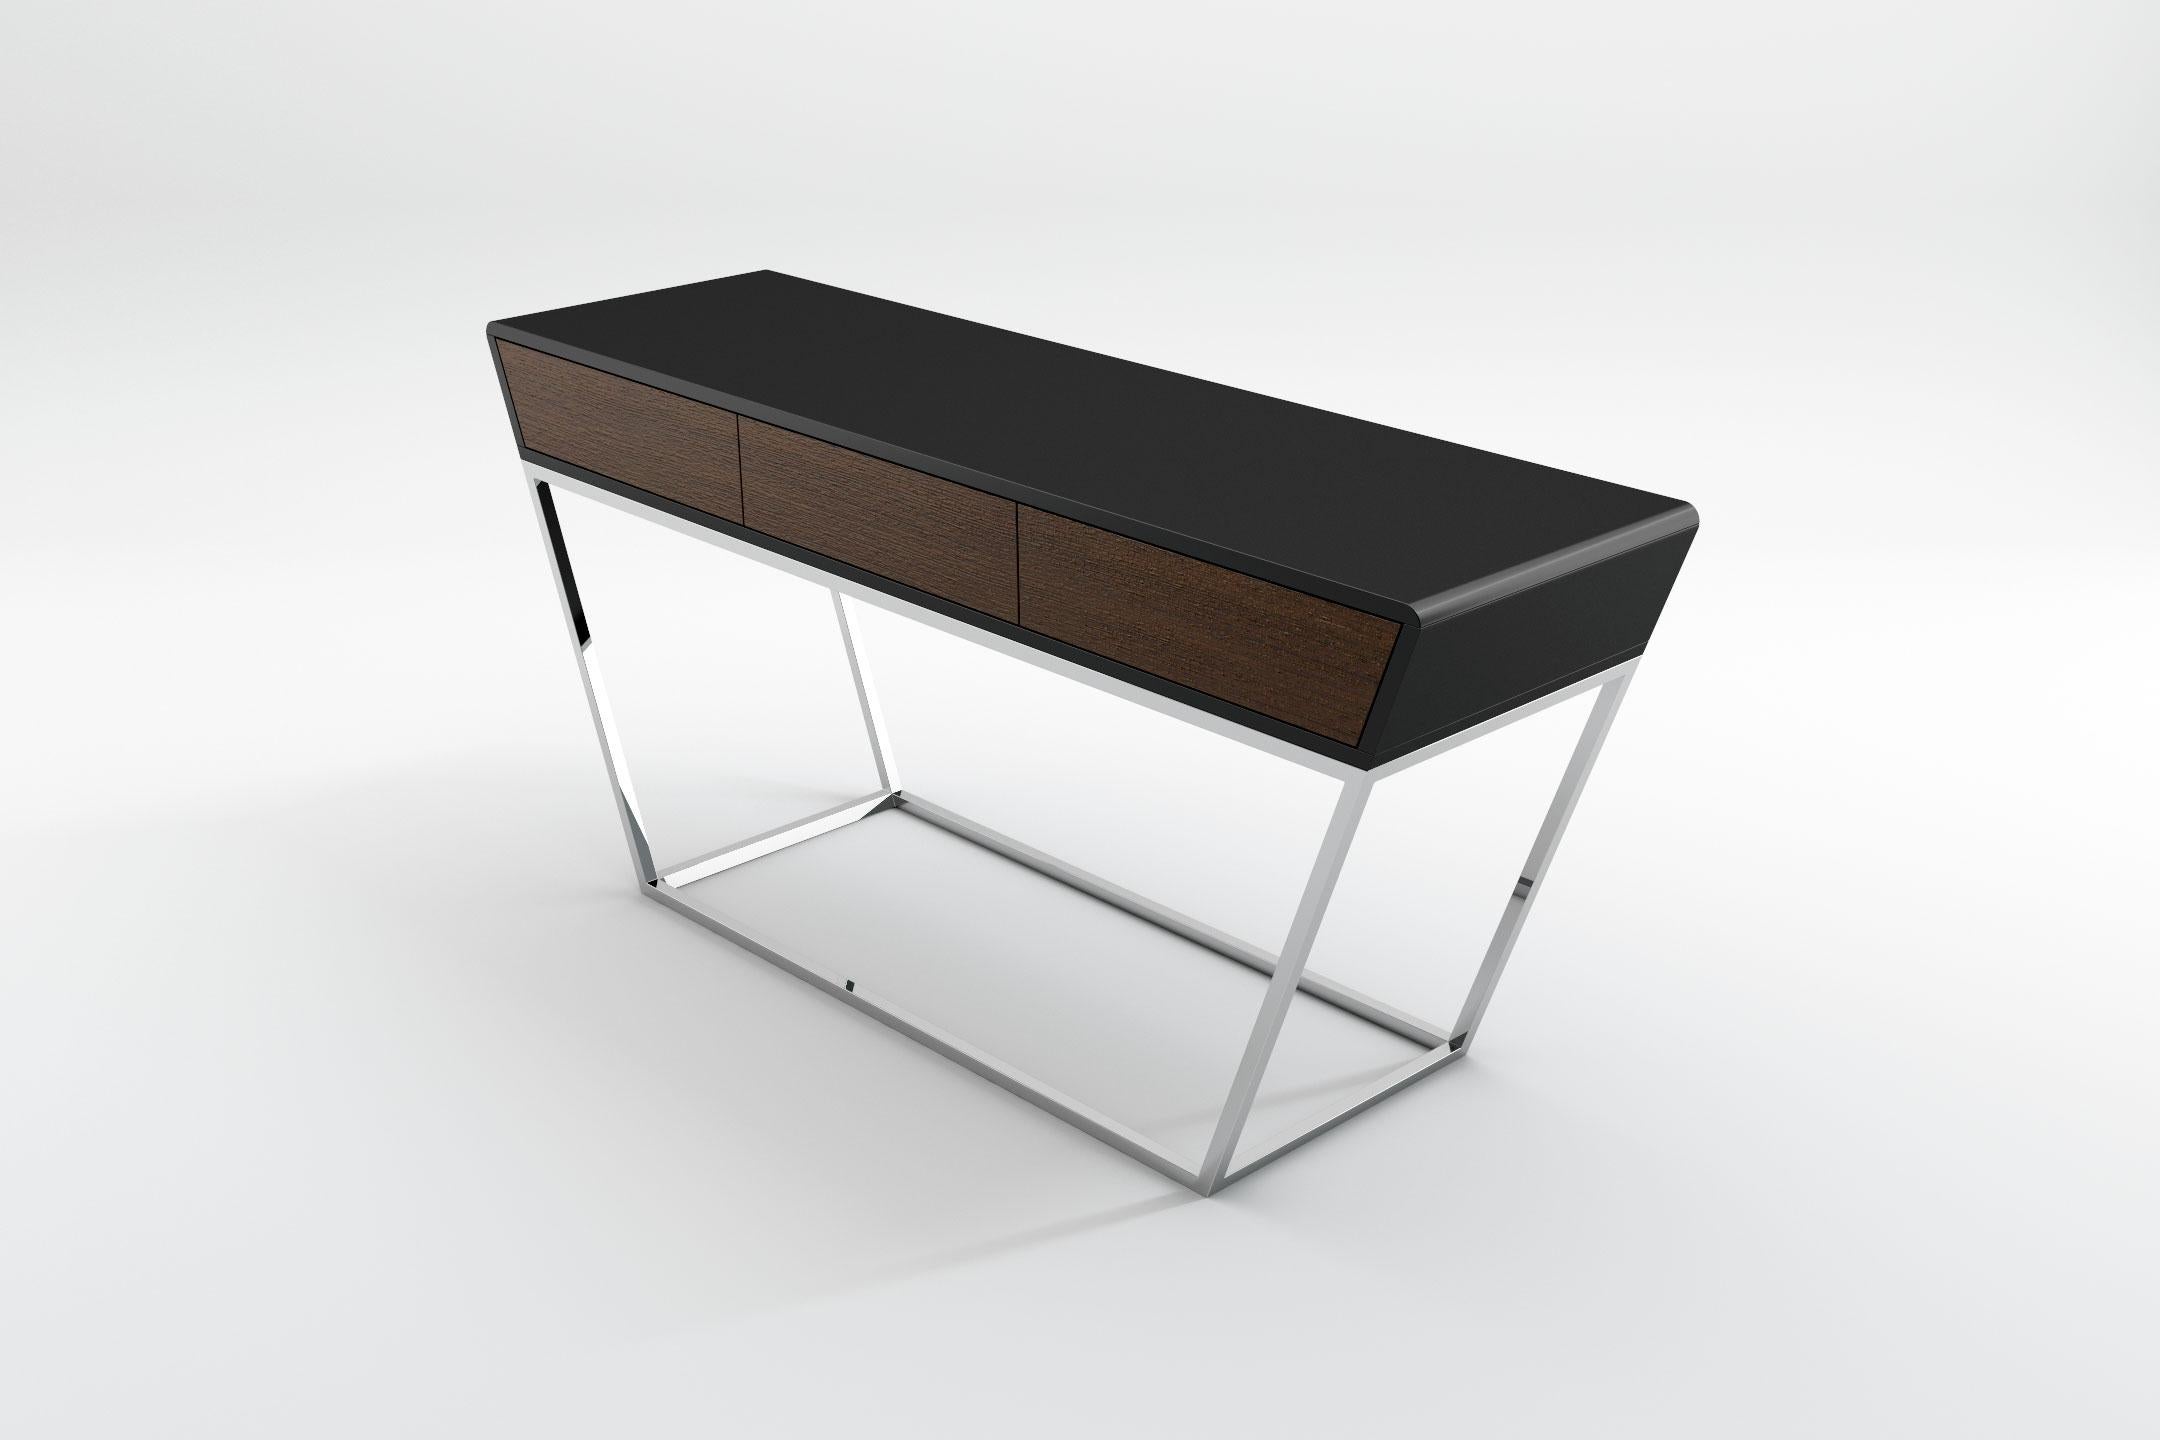 European Obsidian Console - Modern Black Lacquered Console with Stainless Steel Base For Sale